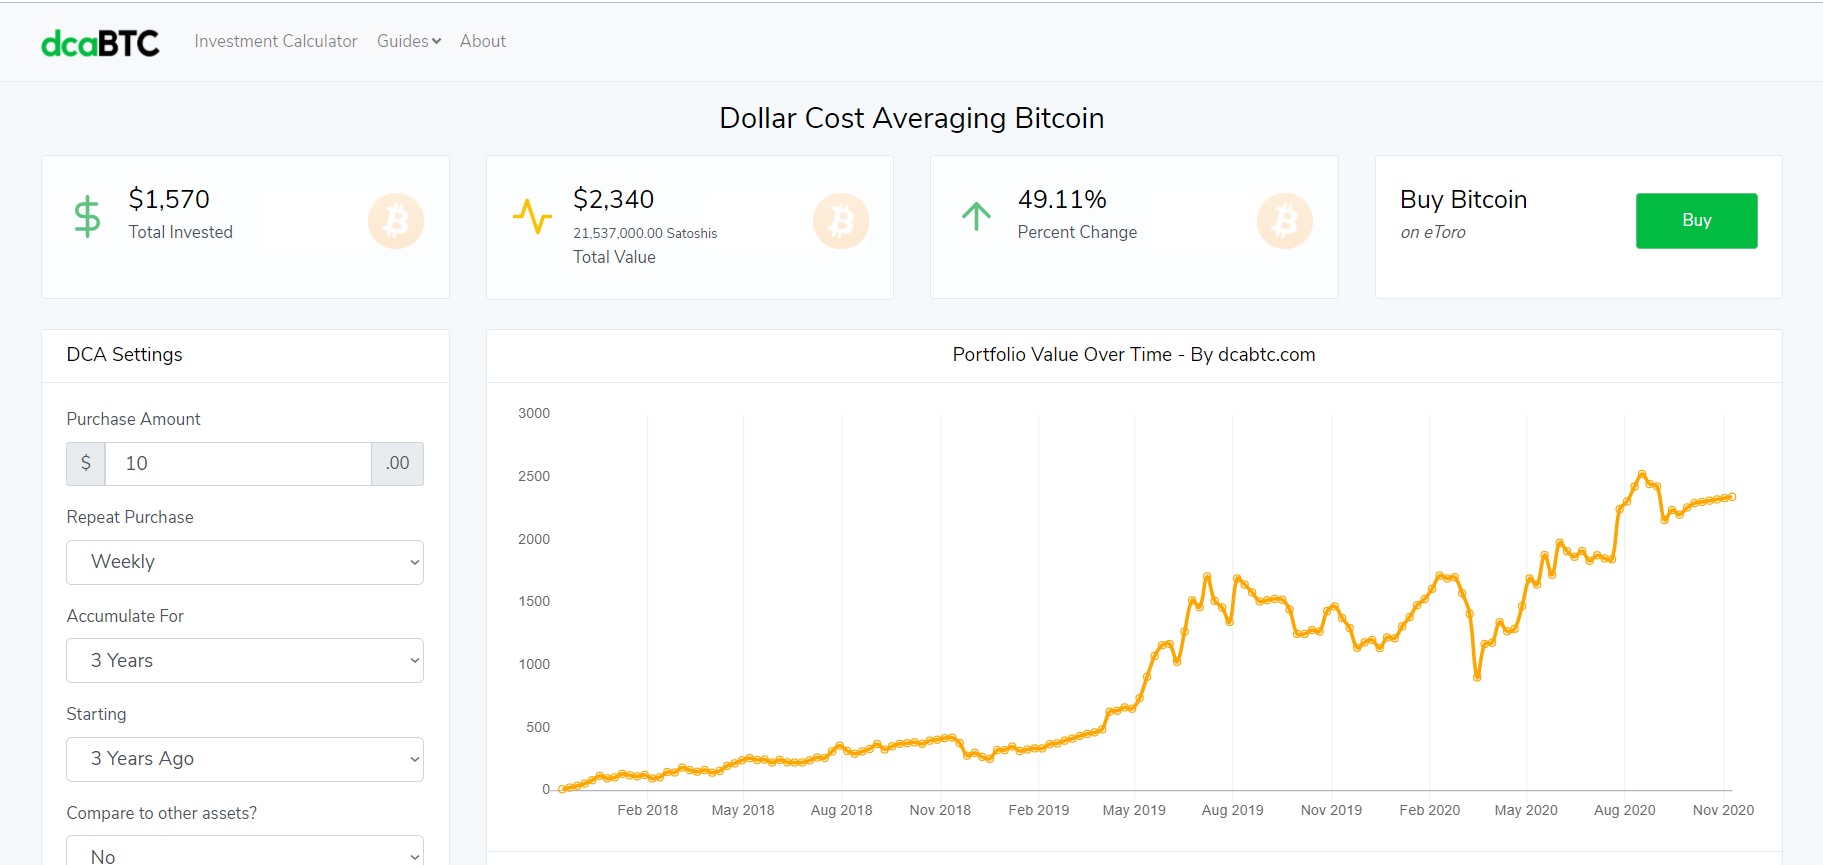 What Is Dollar Cost Averaging In Crypto